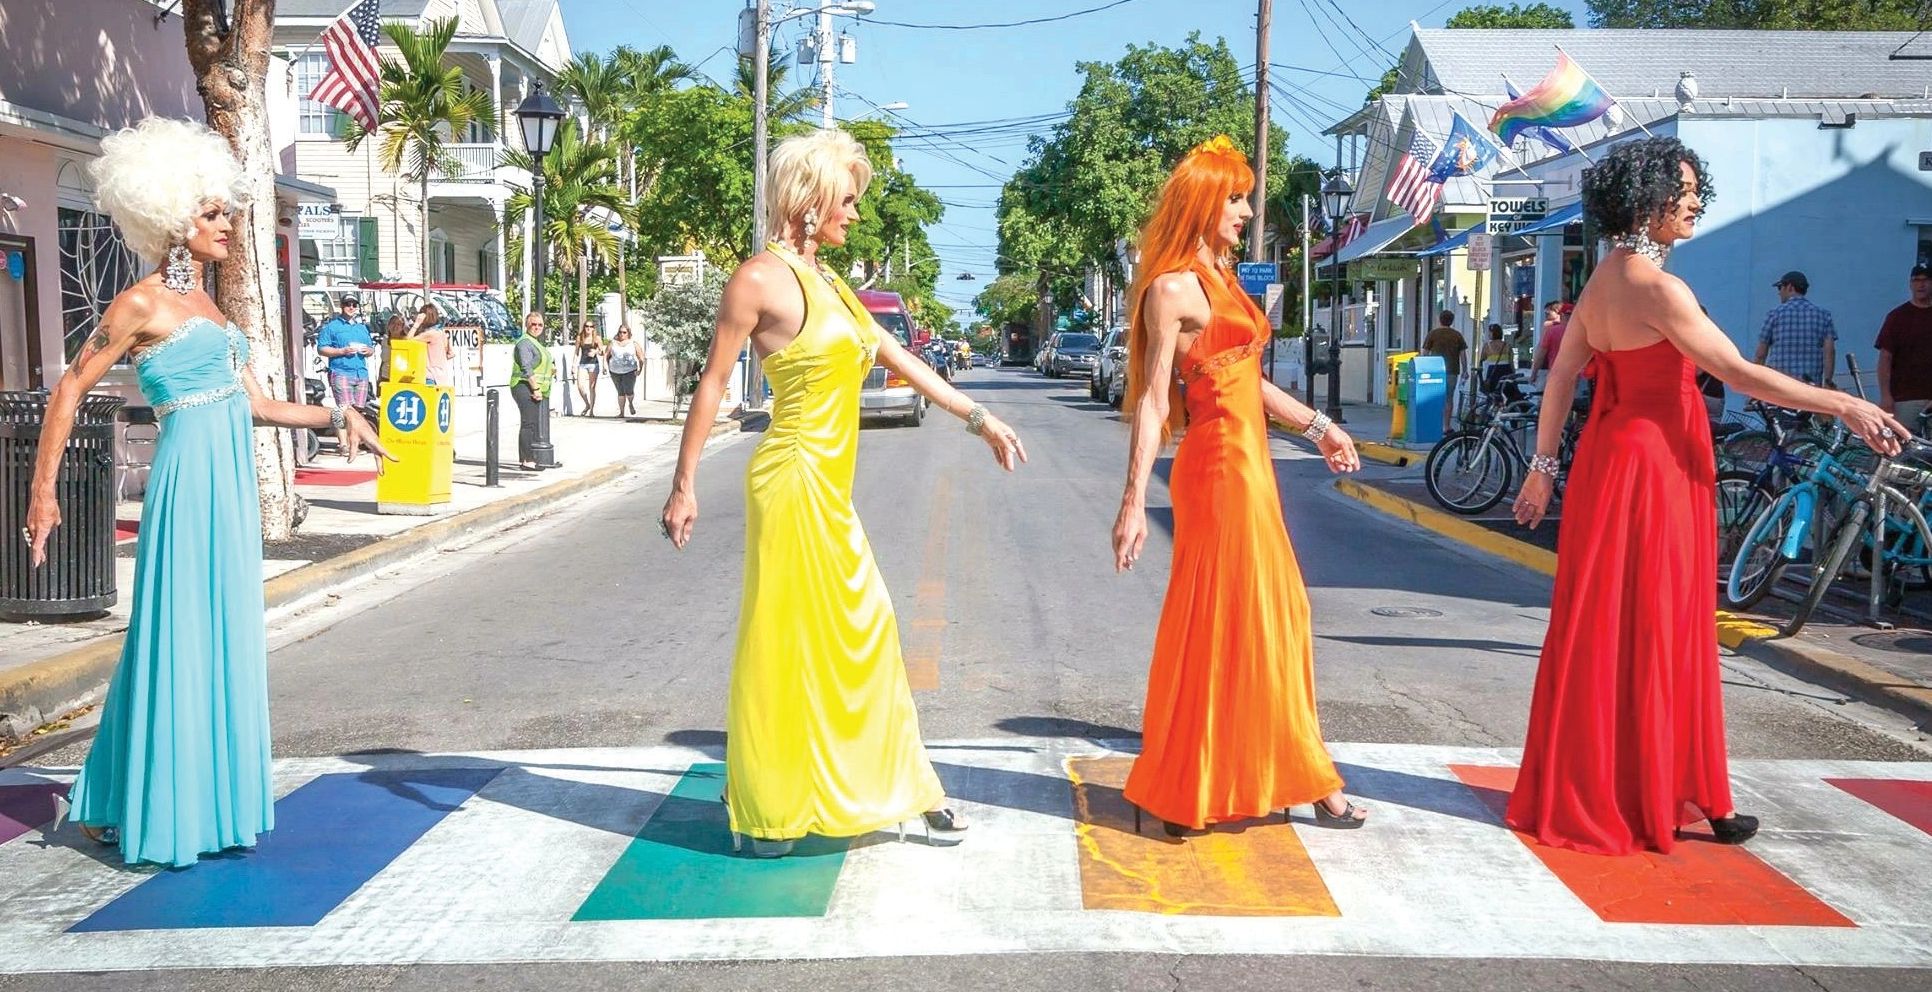 The World Famous 801 Girls, drag queens on Duval Street in Key West, Florida.